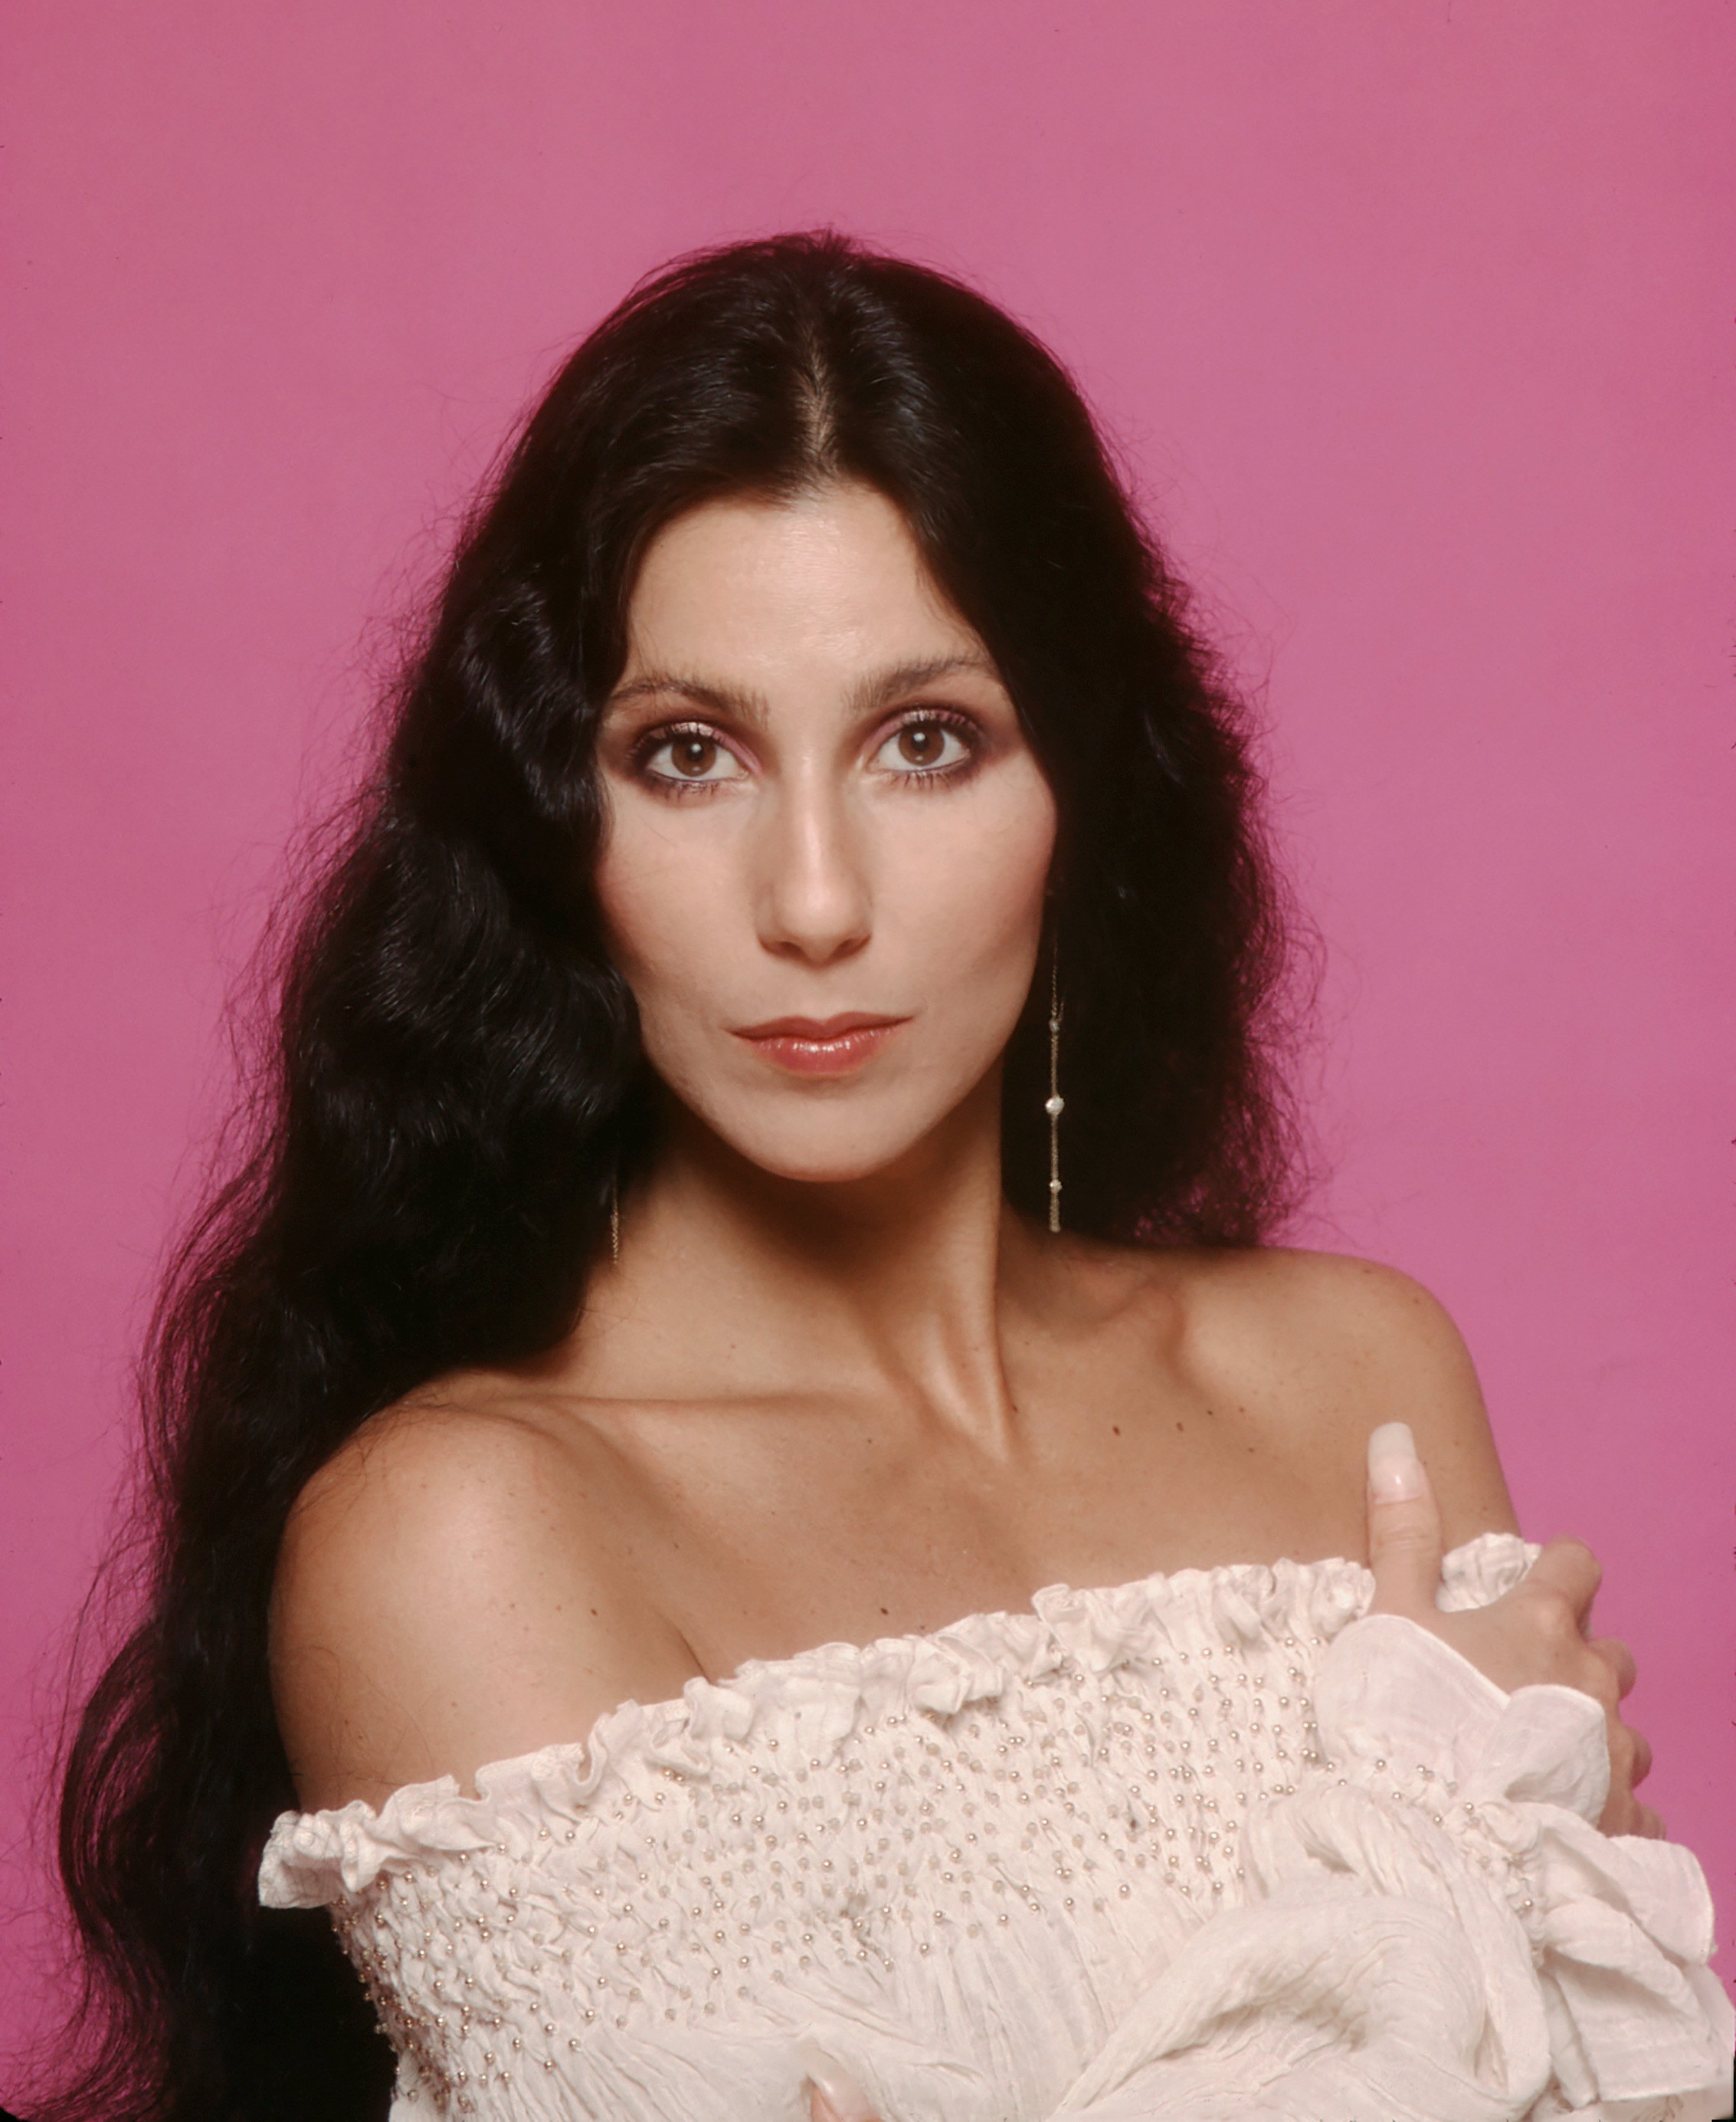 Cher poses during a portrait session in 1980 in Los Angeles, California | Source: Getty Images